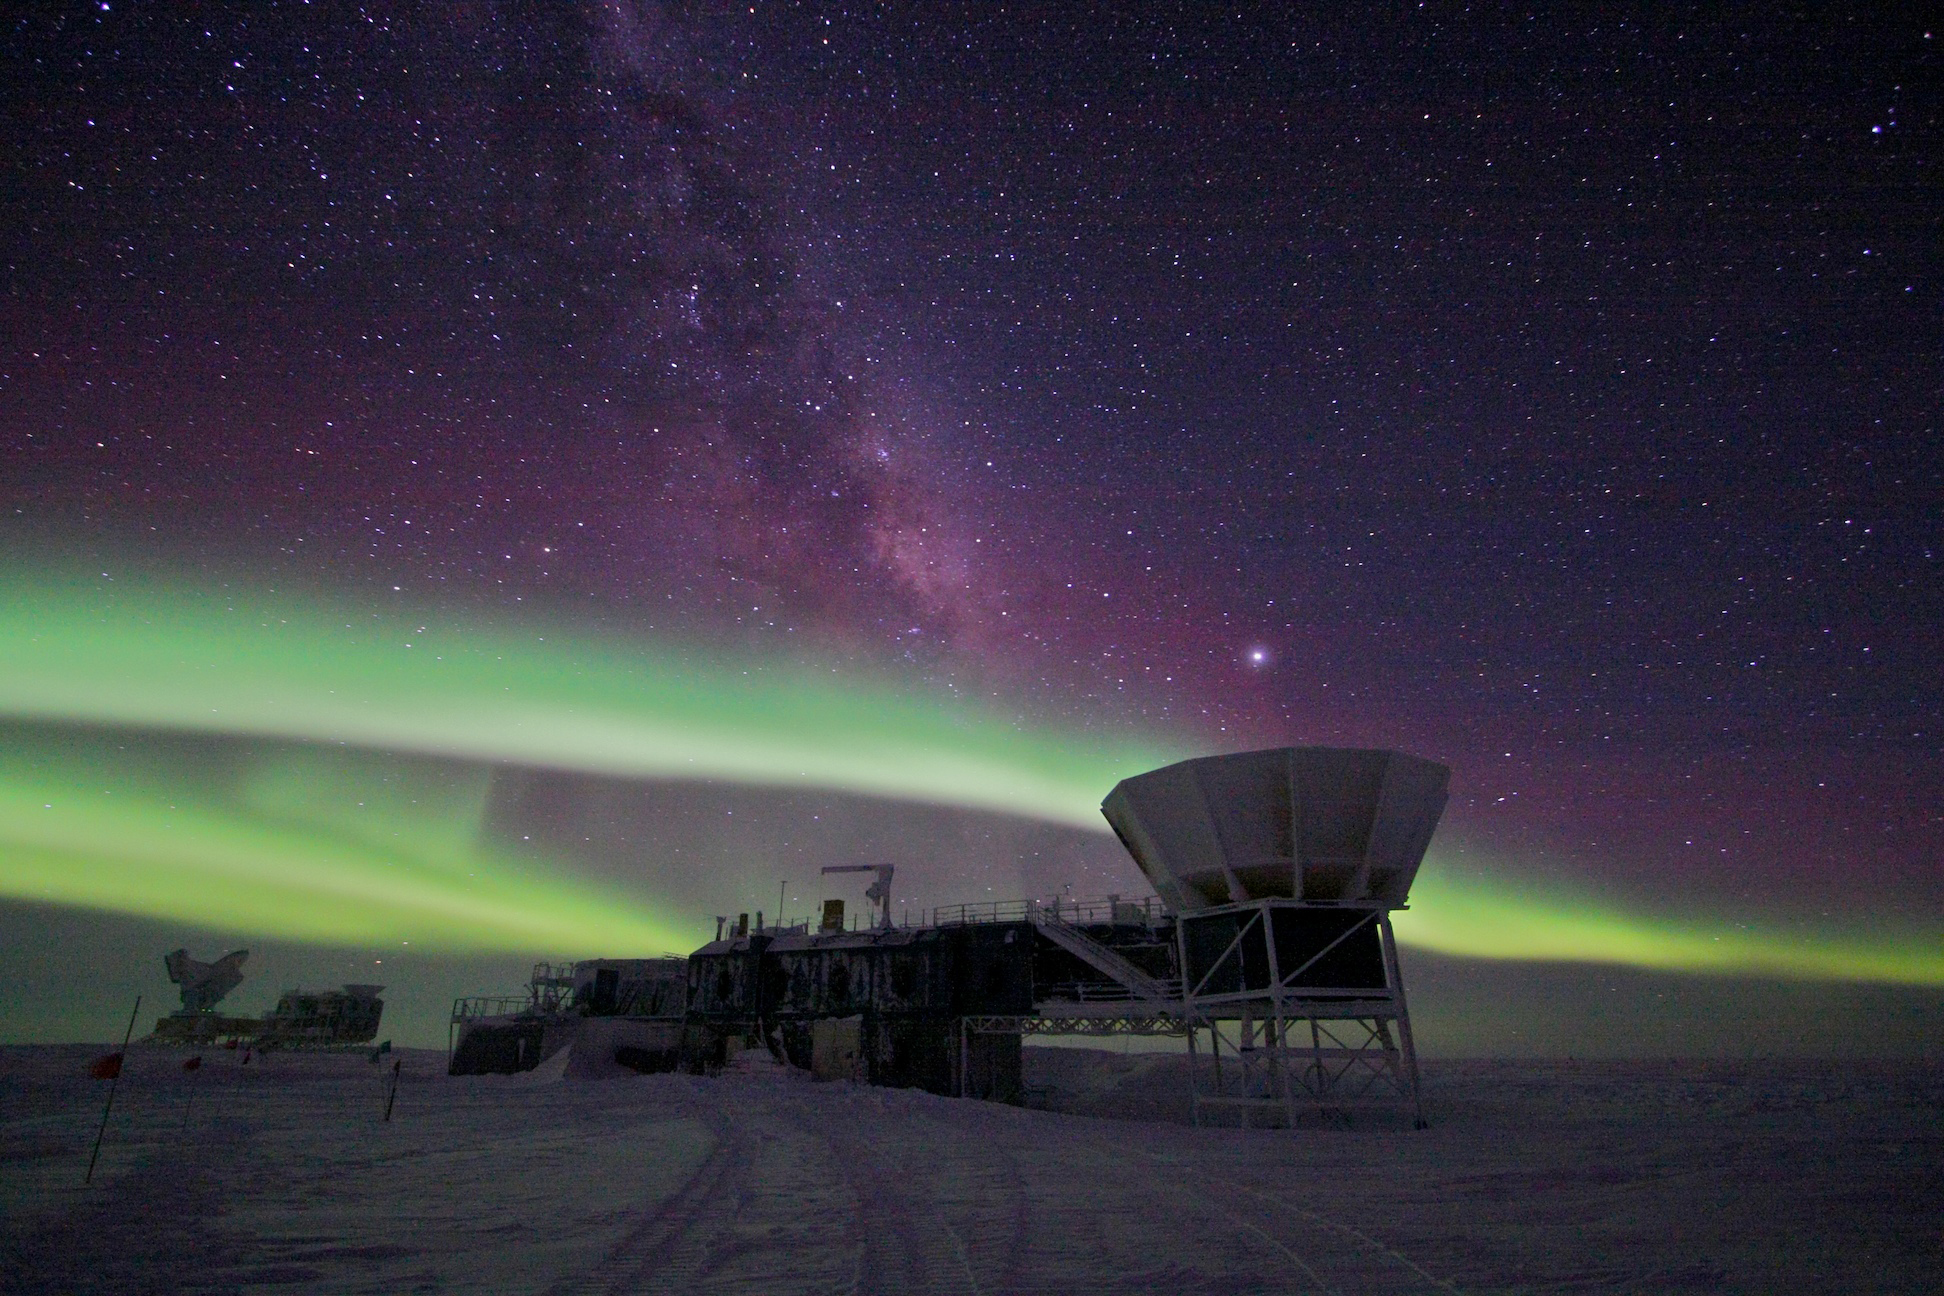 Auroras in the night sky over a science building and telescope at the U.S. research station at the geographic South Pole.